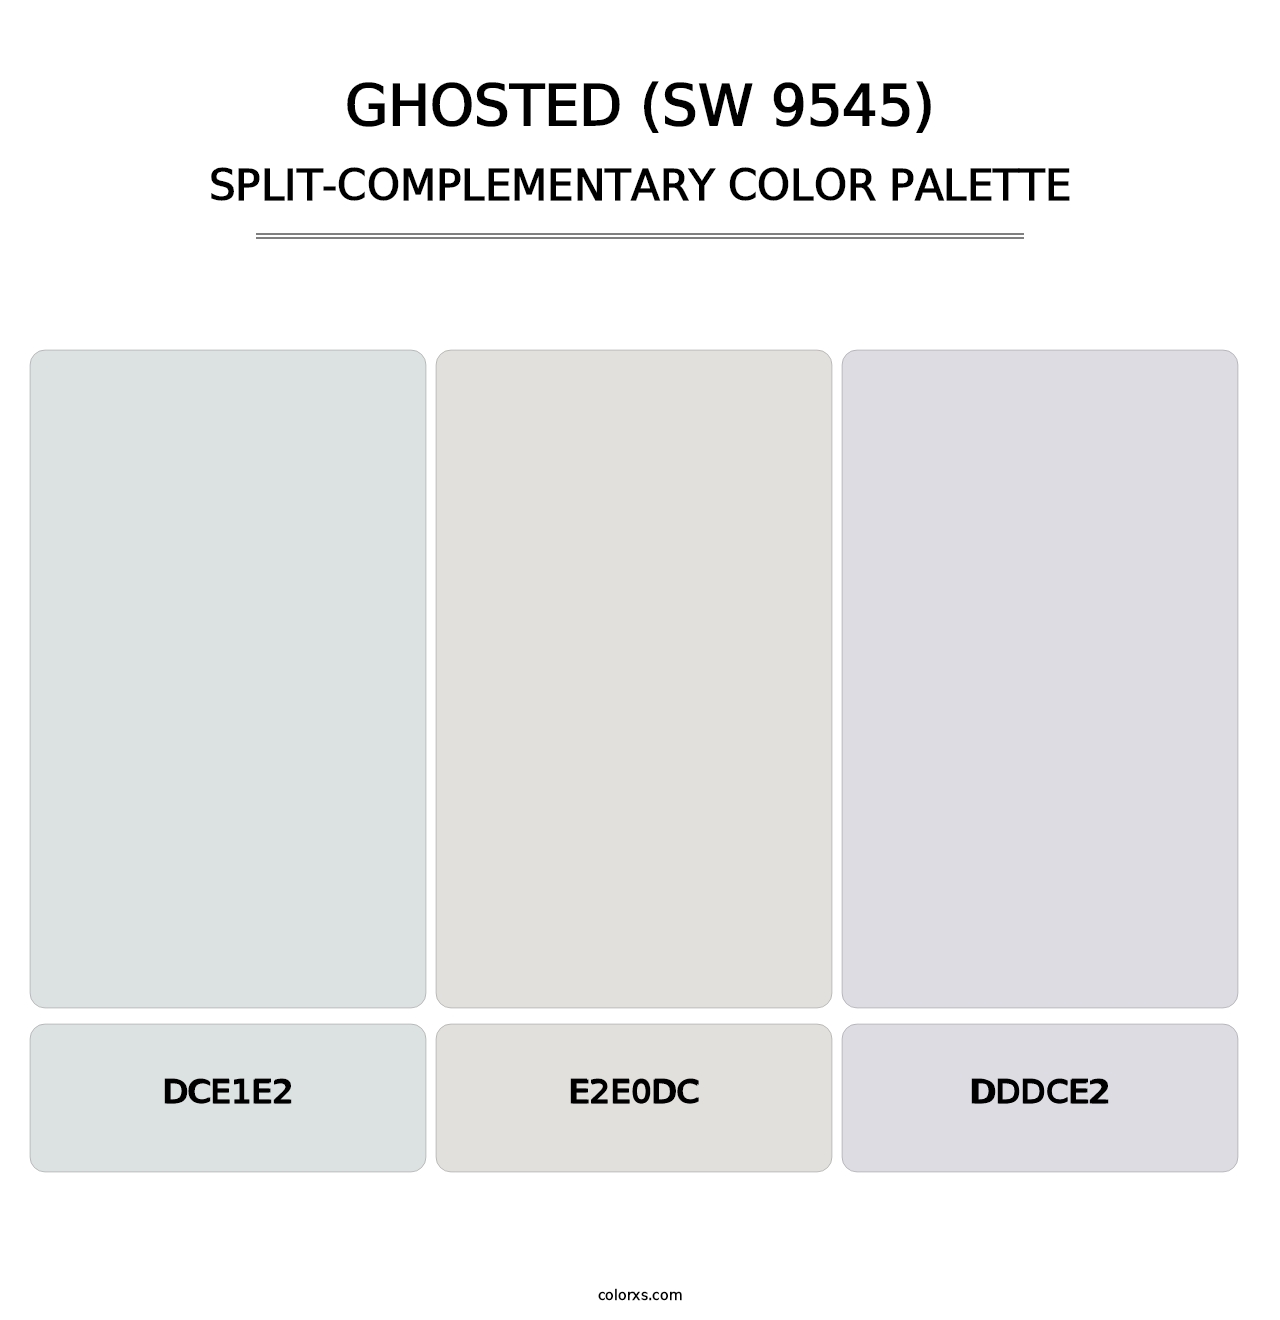 Ghosted (SW 9545) - Split-Complementary Color Palette